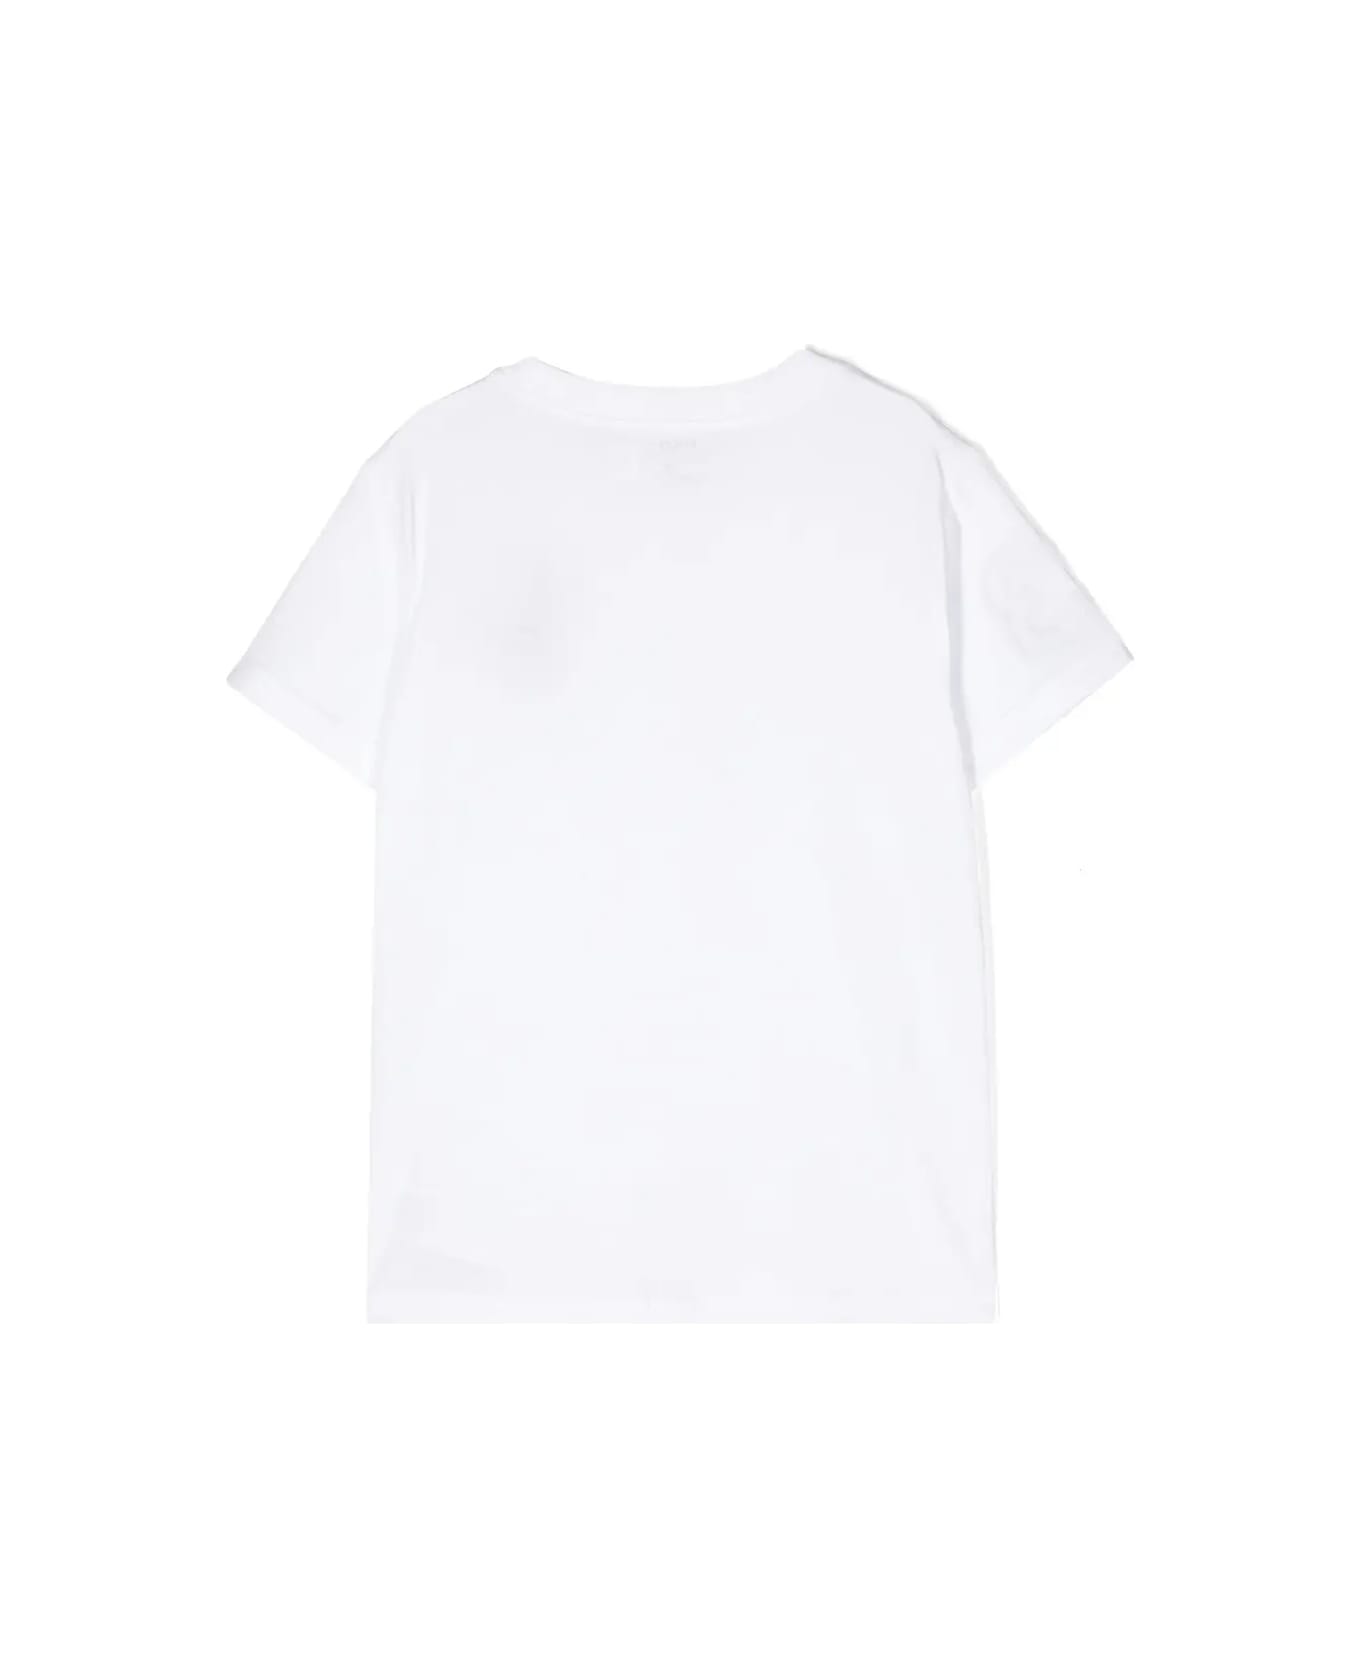 Ralph Lauren Pony Polo T-shirt In White And Blue - White